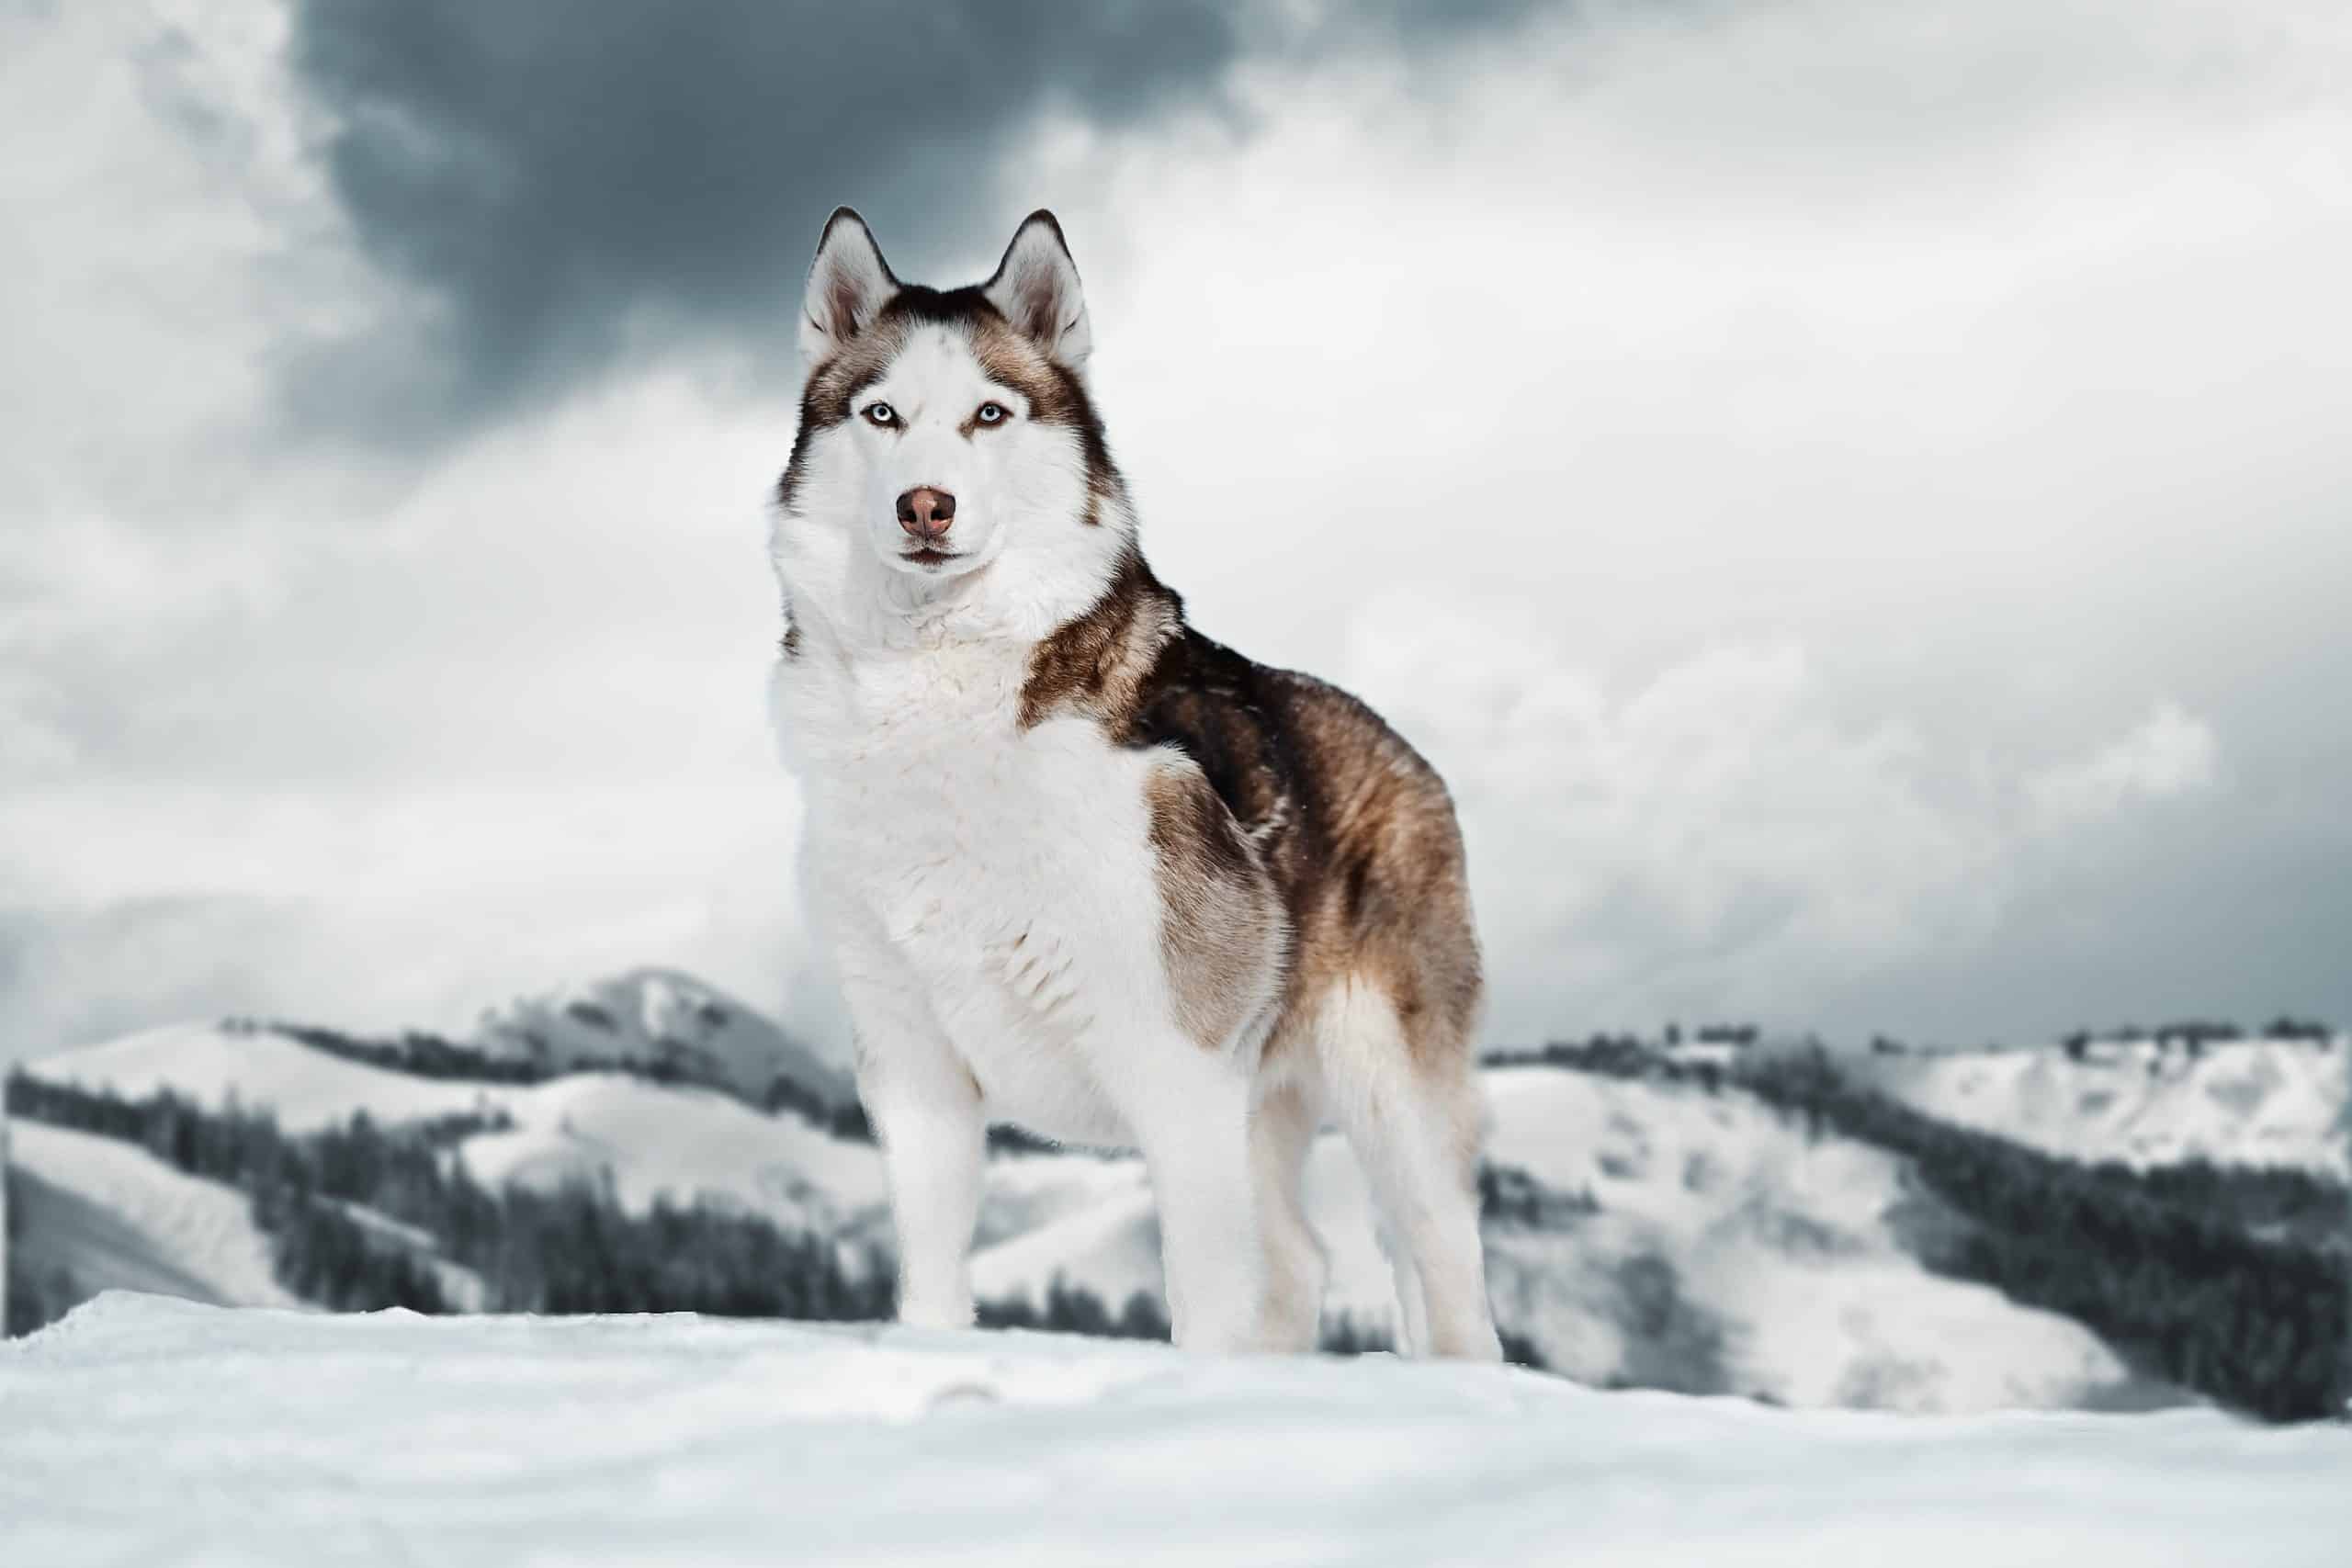 The Siberian Husky is a very domesticated pet nowadays, and it’s among the most popular dog breeds around the world.